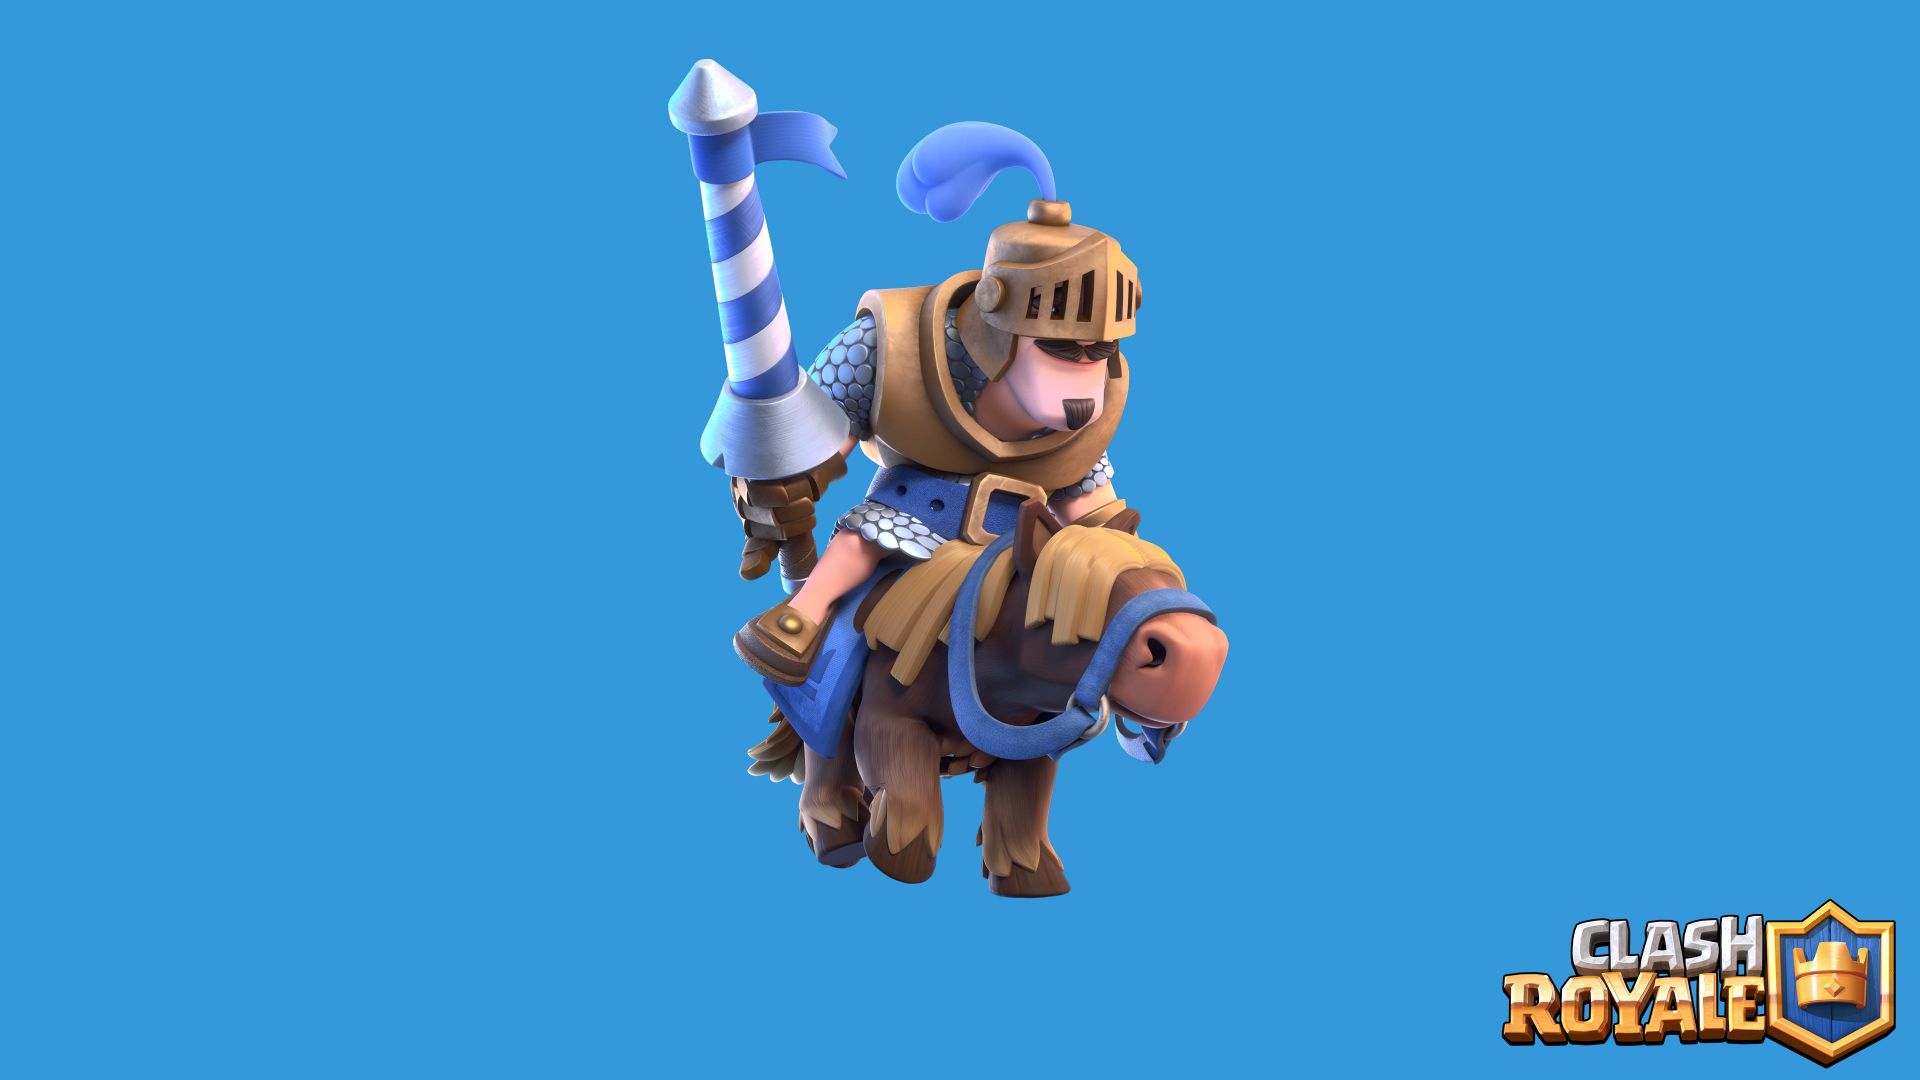 Wallpaper Clash Royale, Mobile game, knight